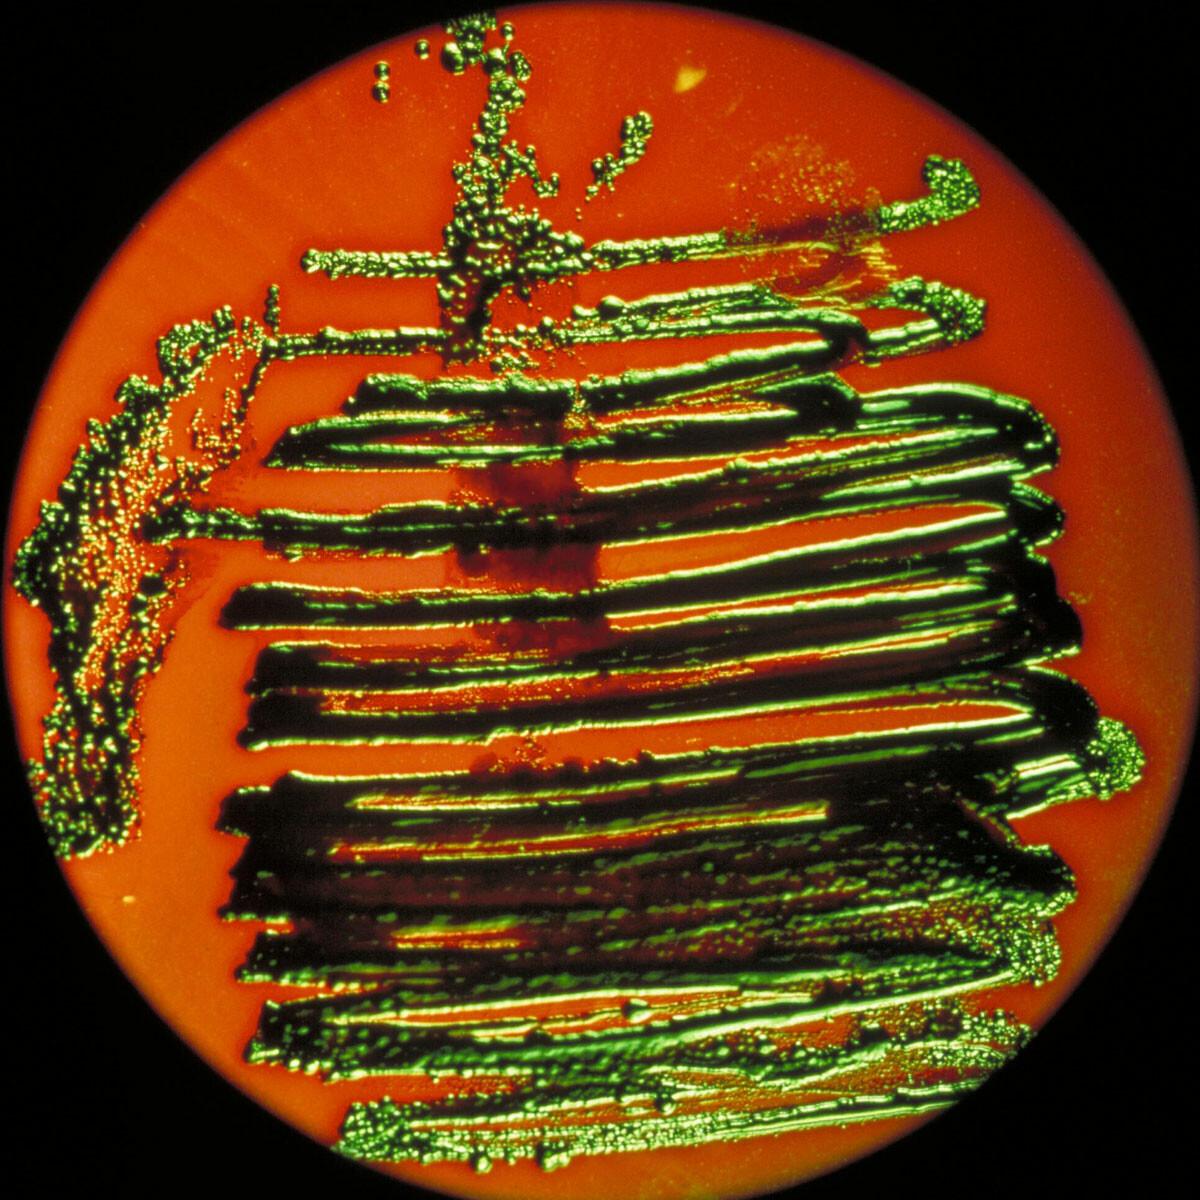 A petri dish covered with colonies of E. Coli